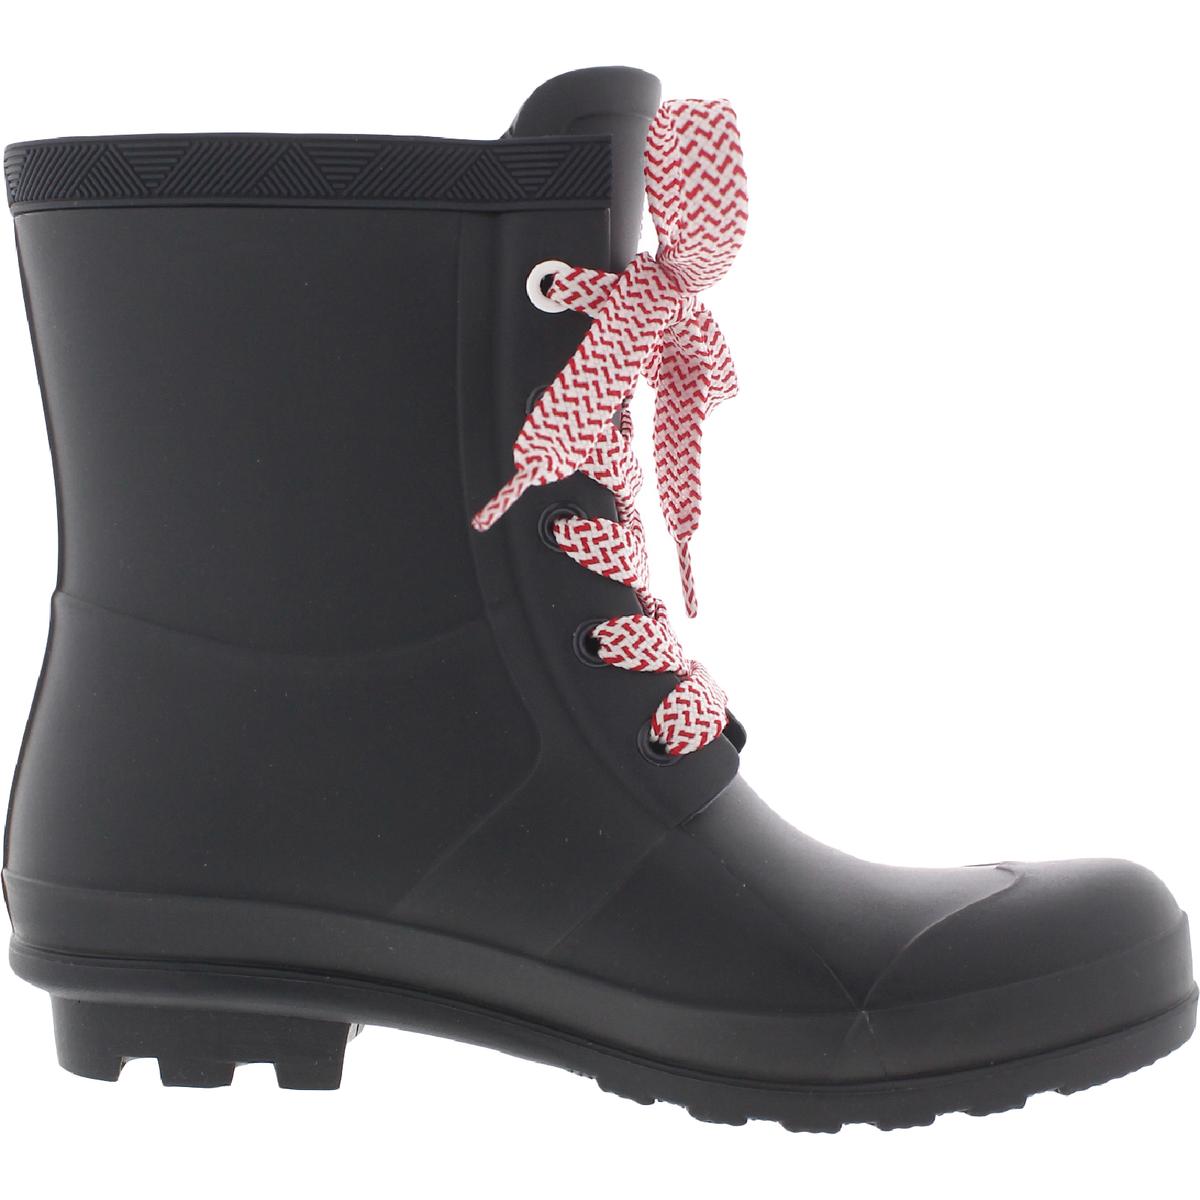 Tommy Hilfiger Womens Tamar Lace Up Wellies Ankle Rain Boots Shoes BHFO 6714 |